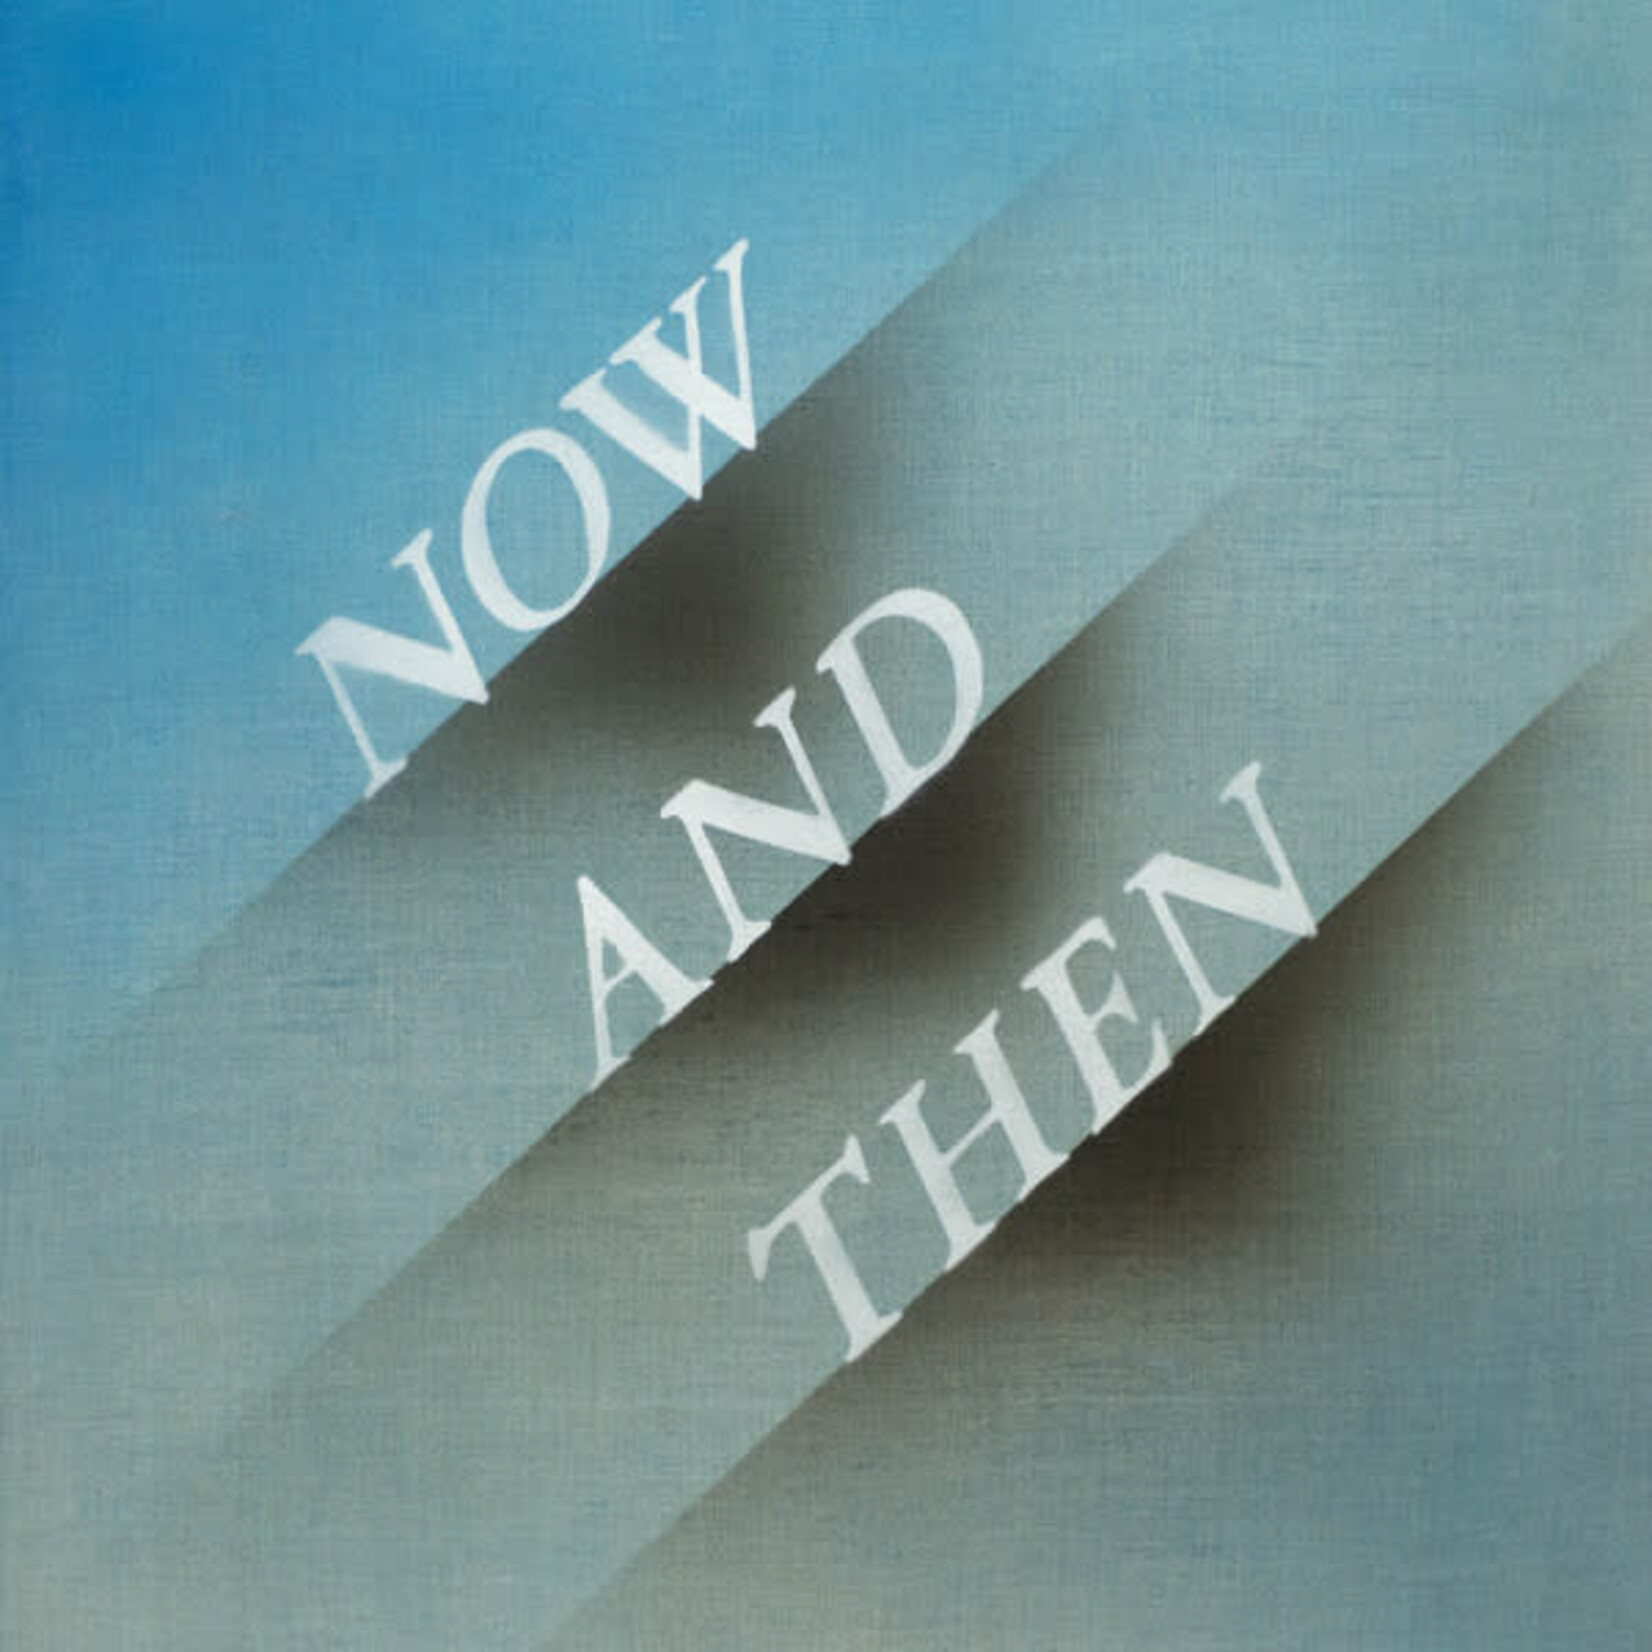 [New] Beatles: Now and Then/Love Me Do (7", blue/white marble vinyl) [APPLE]